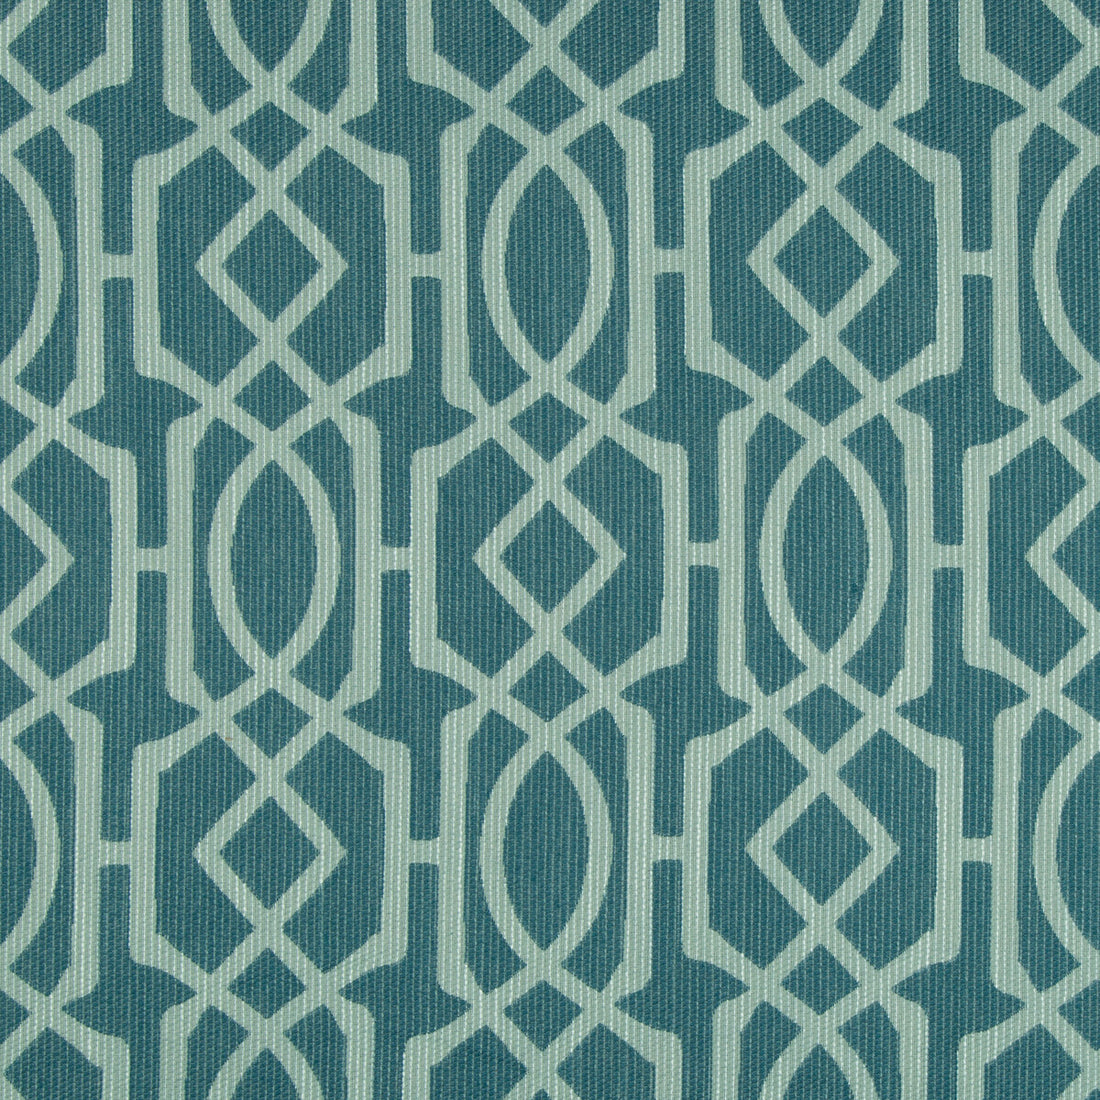 Kravet Design fabric in 34700-35 color - pattern 34700.35.0 - by Kravet Design in the Performance Crypton Home collection